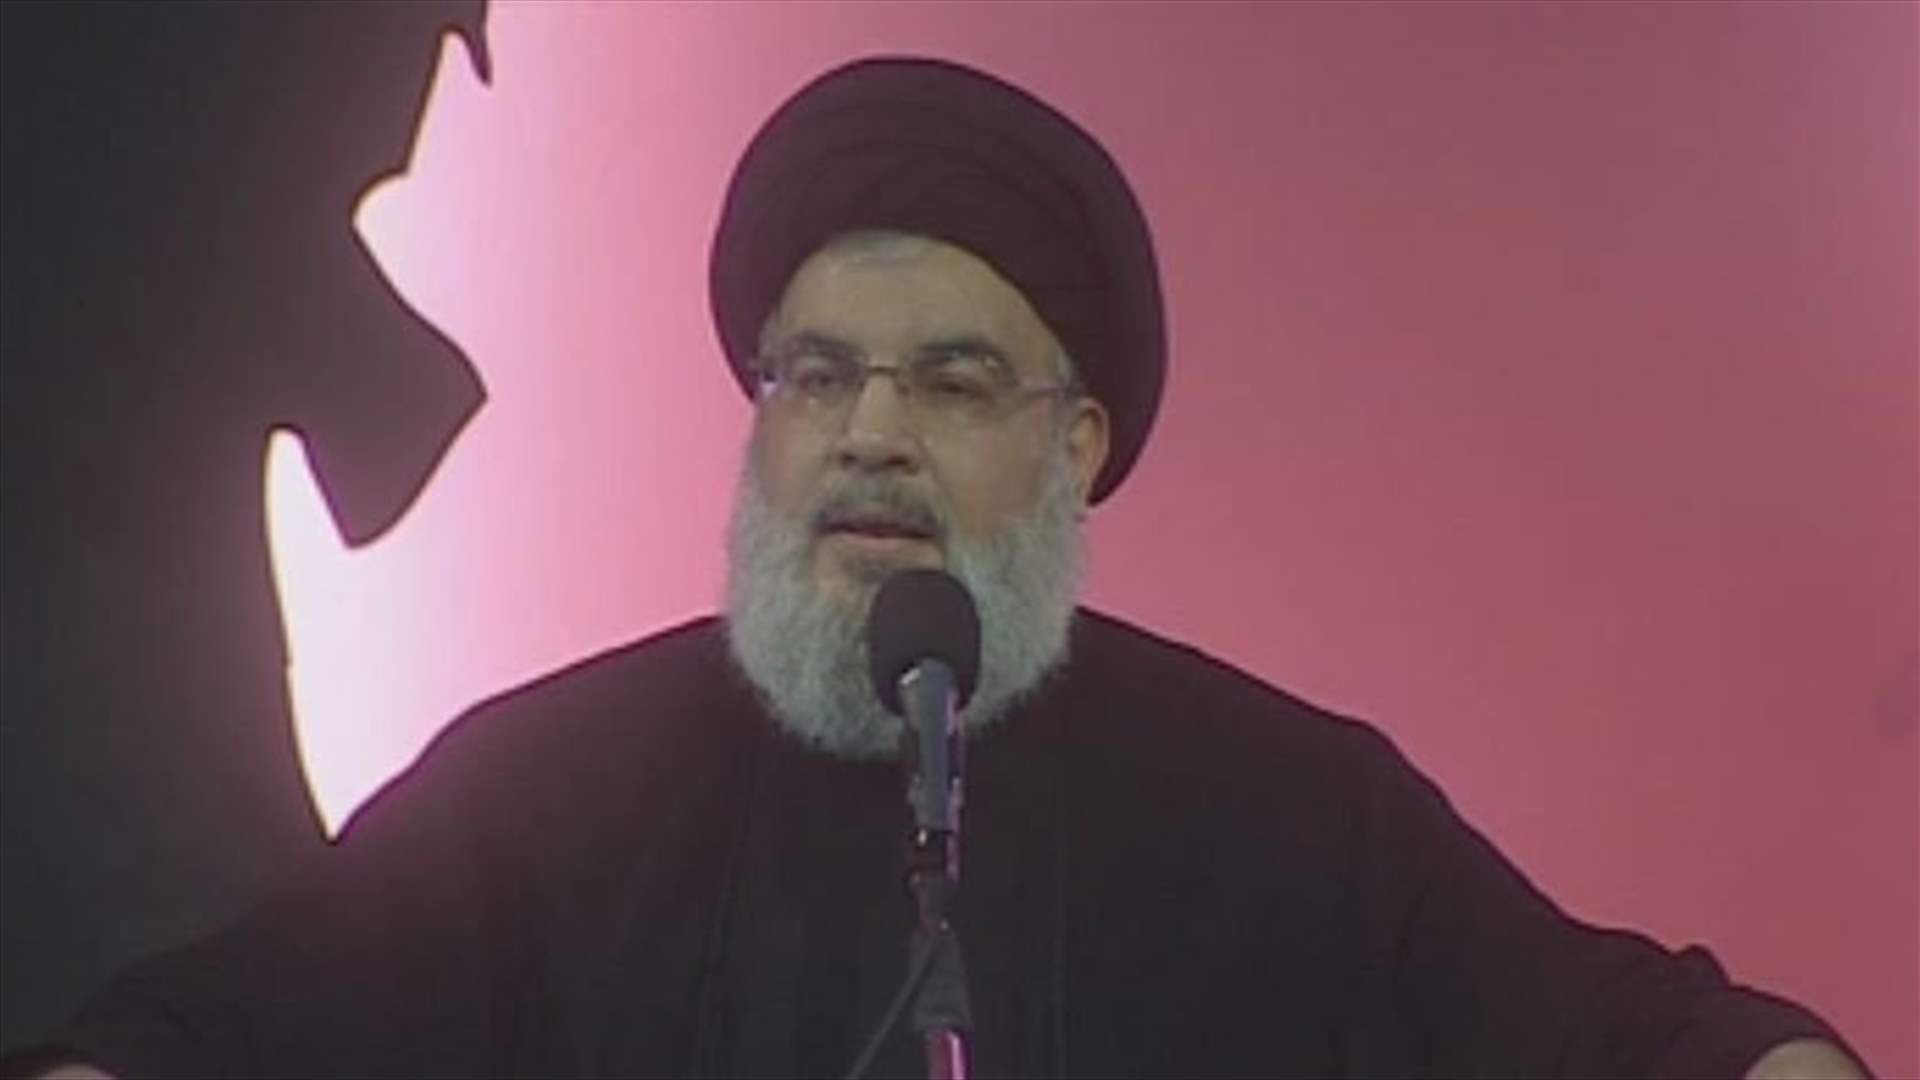 Nasrallah makes public appearance, says region to witness escalation